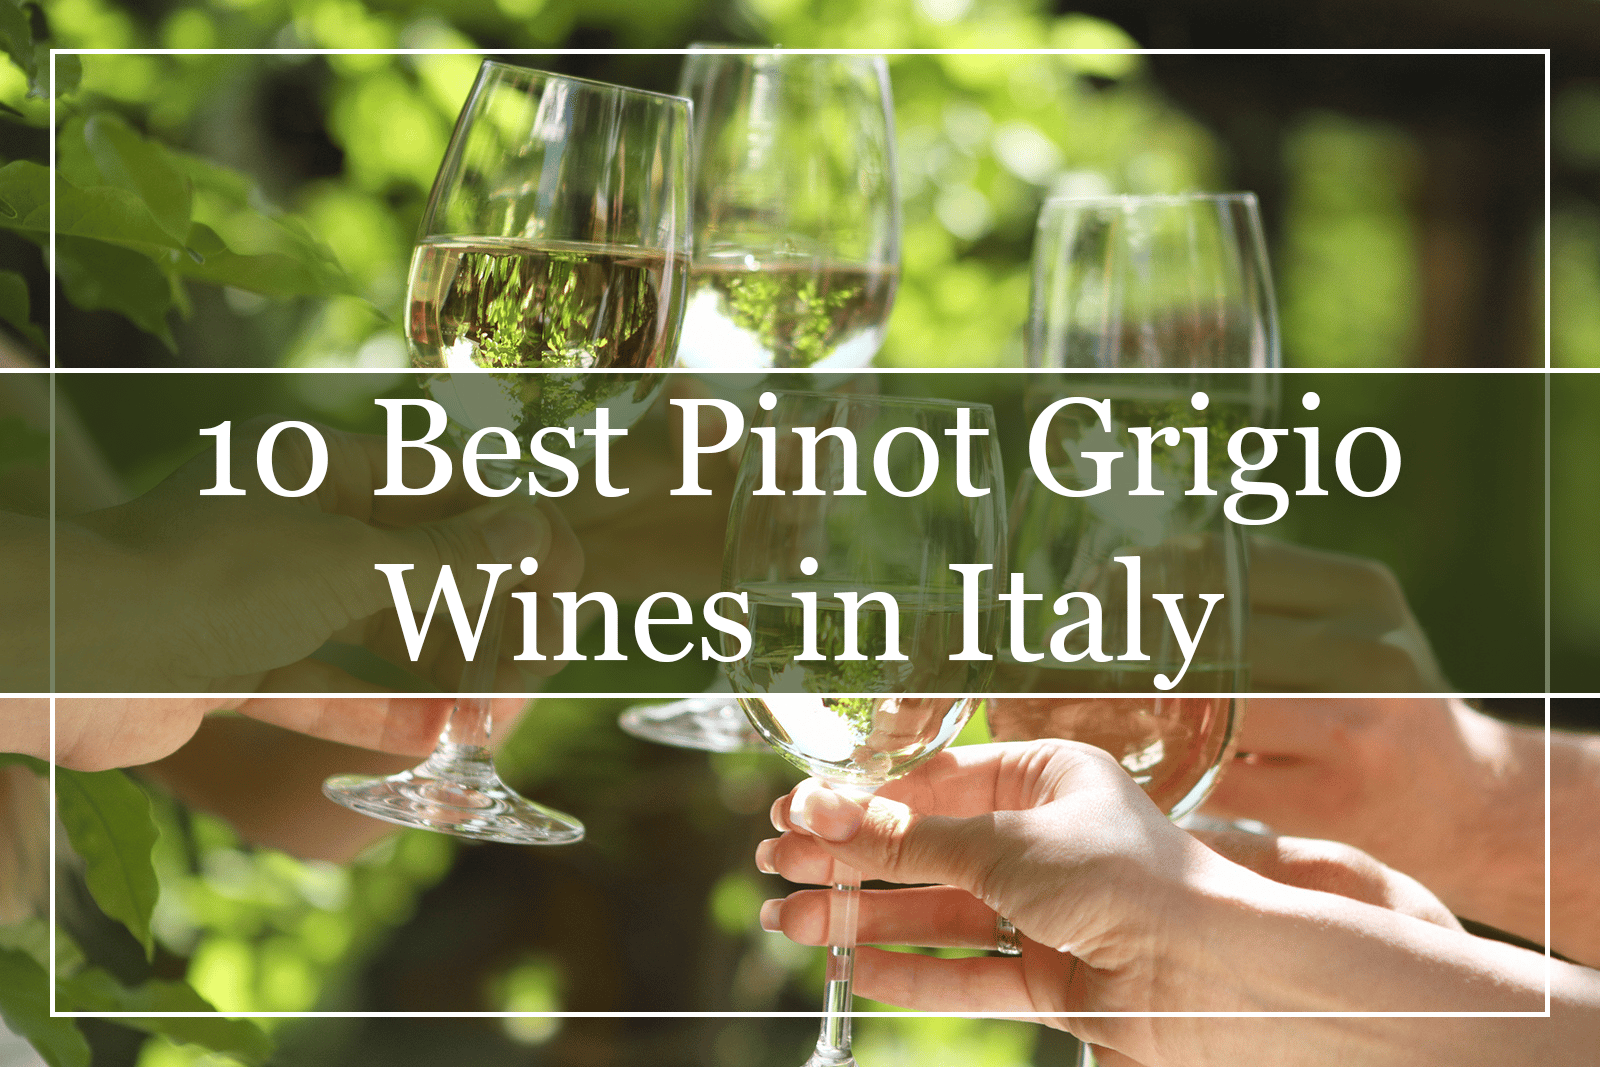 10 Best Pinot Grigio Wines From Italy (2022)